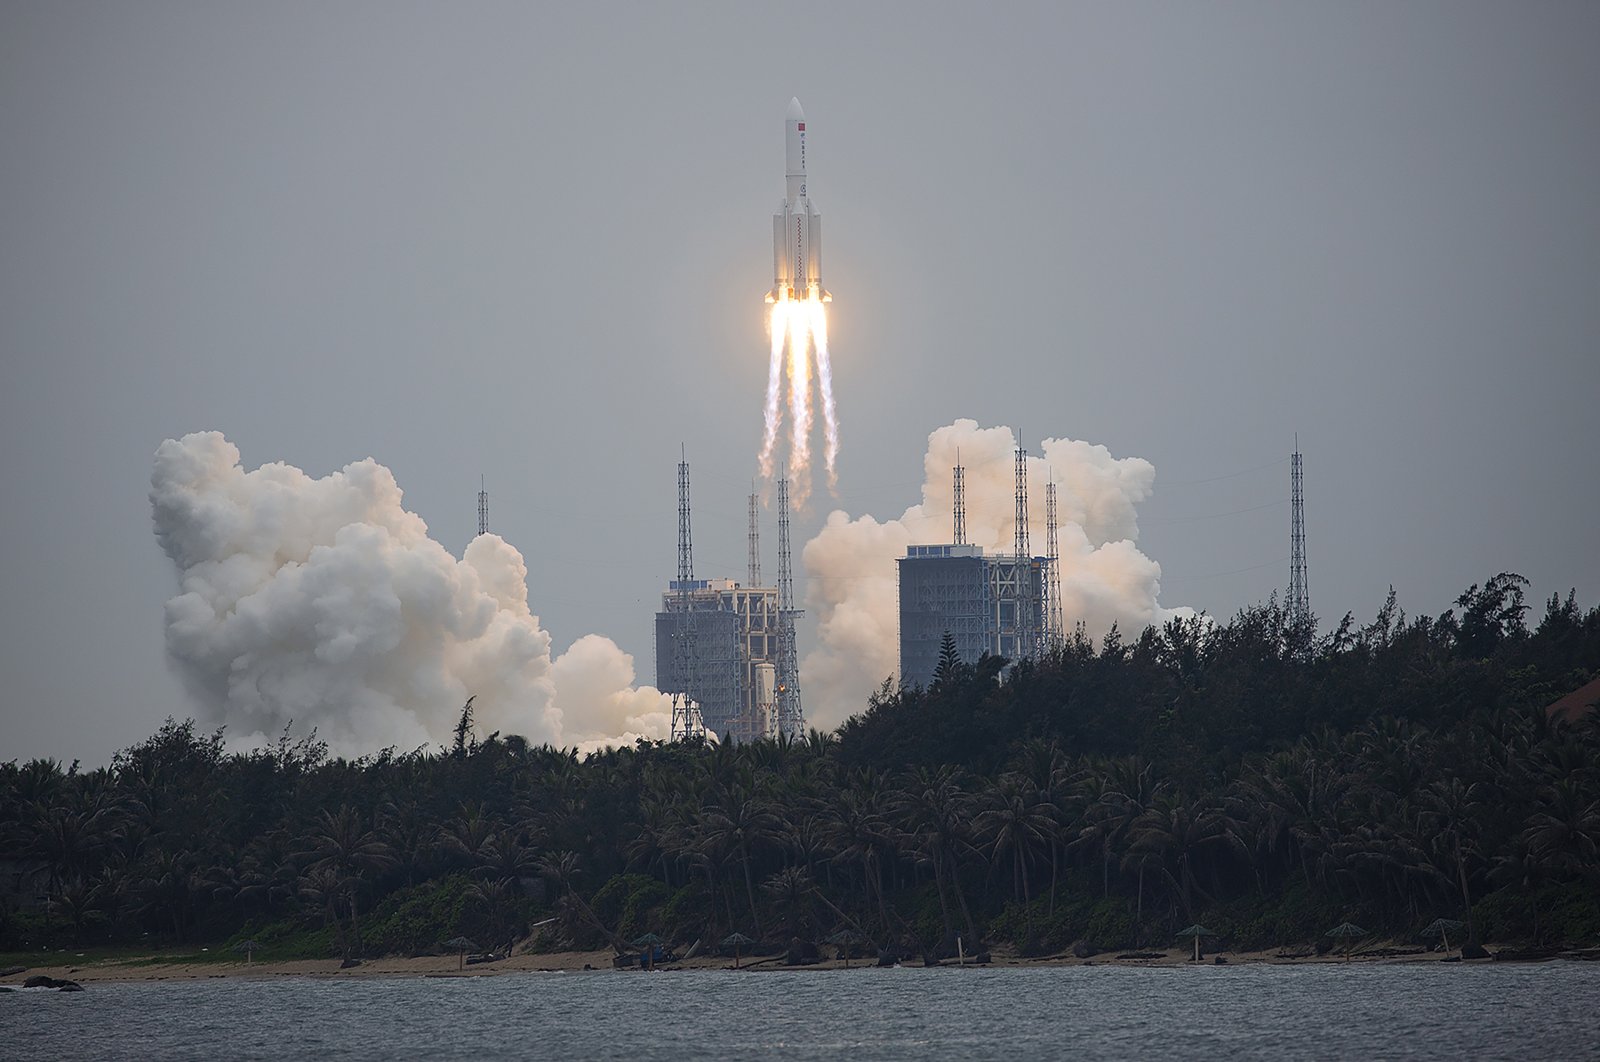 A Long March 5B rocket carrying a module for a Chinese space station lifts off from the Wenchang Spacecraft Launch Site in Wenchang in Hainan Province, southern China, April 29, 2021. (Chinatopix via AP)